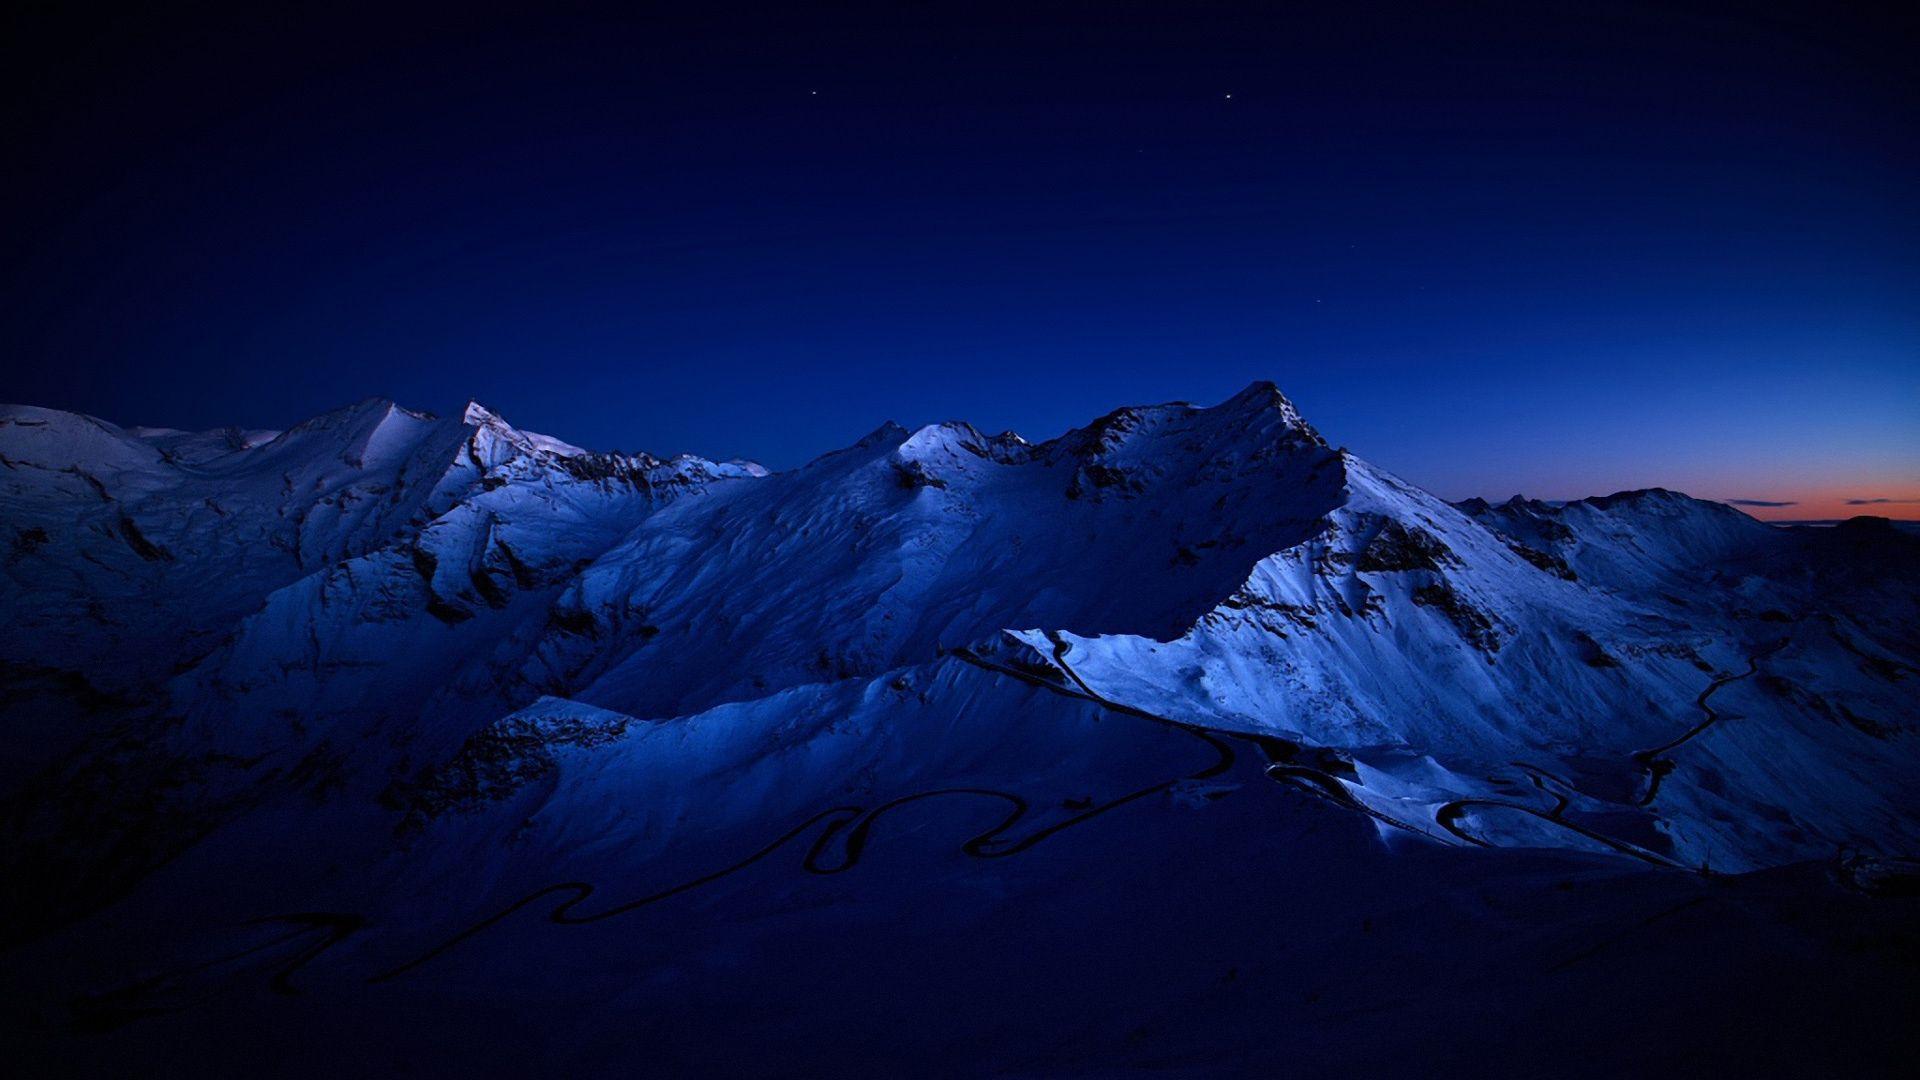 Wallpaper mountains, night, sky, road, bends, darkness. Mountains at night, Dark mountains, Mountain picture